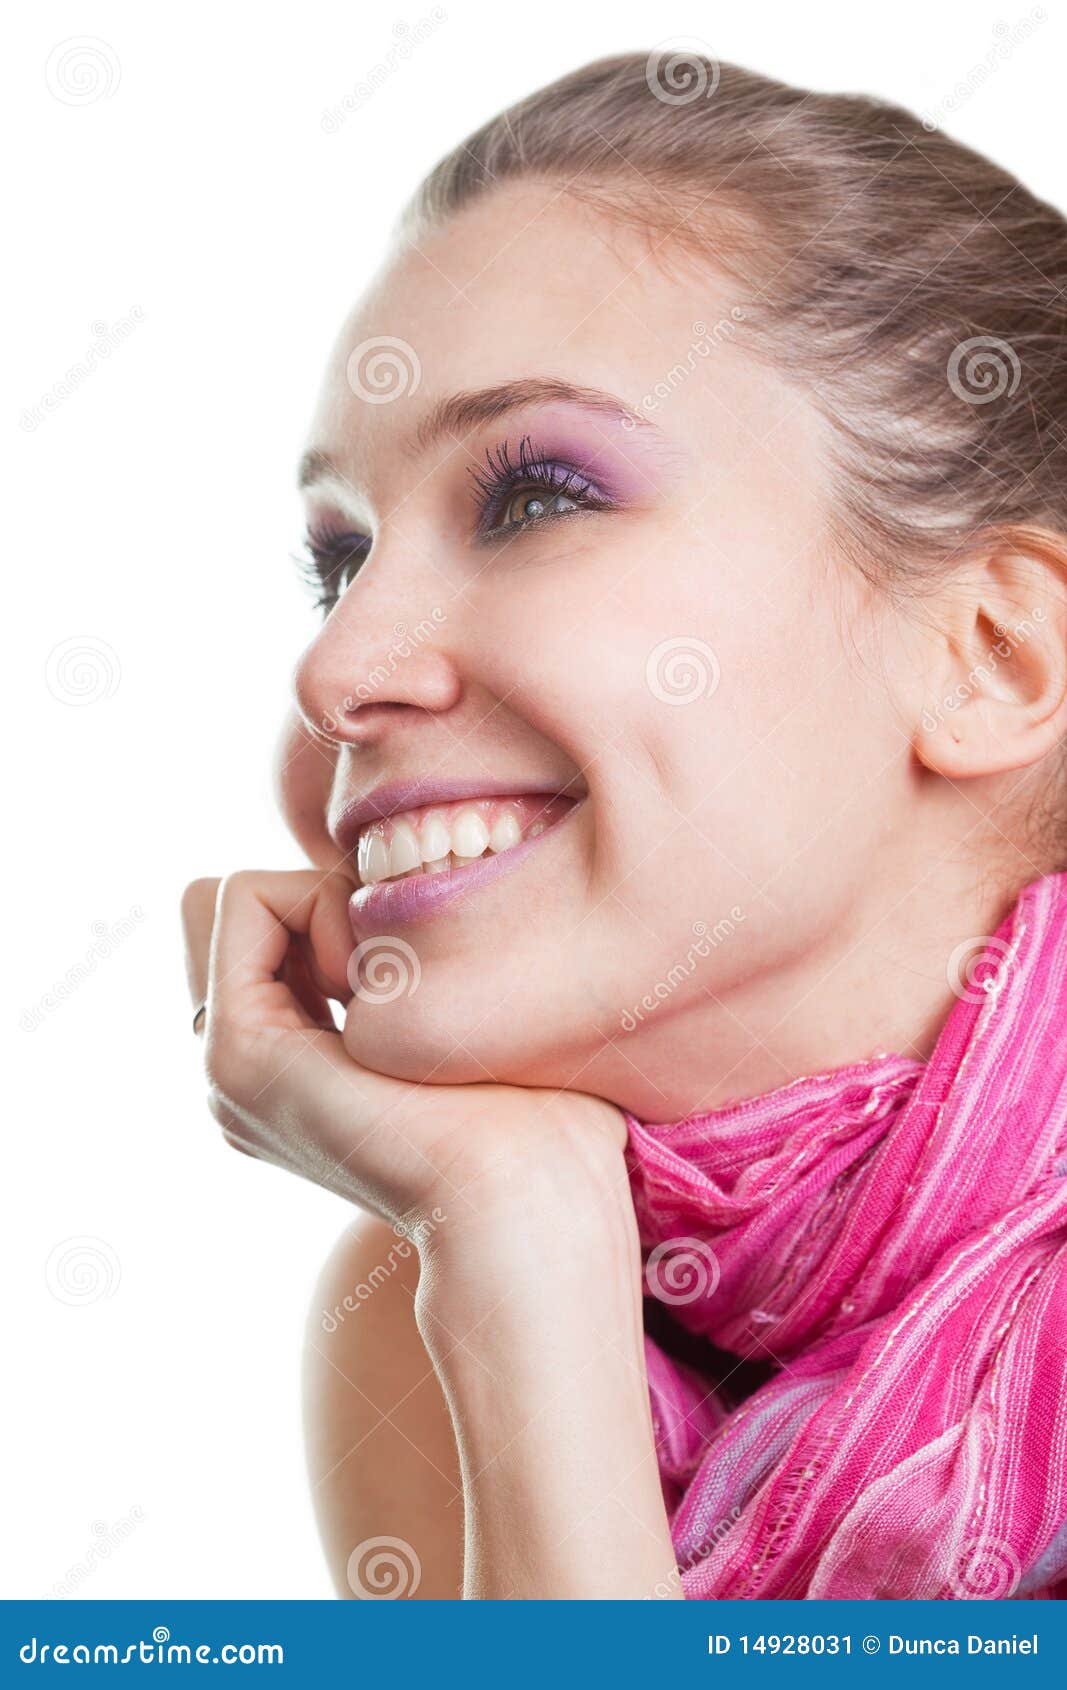 http://thumbs.dreamstime.com/z/face-one-happy-joyful-young-woman-14928031.jpg